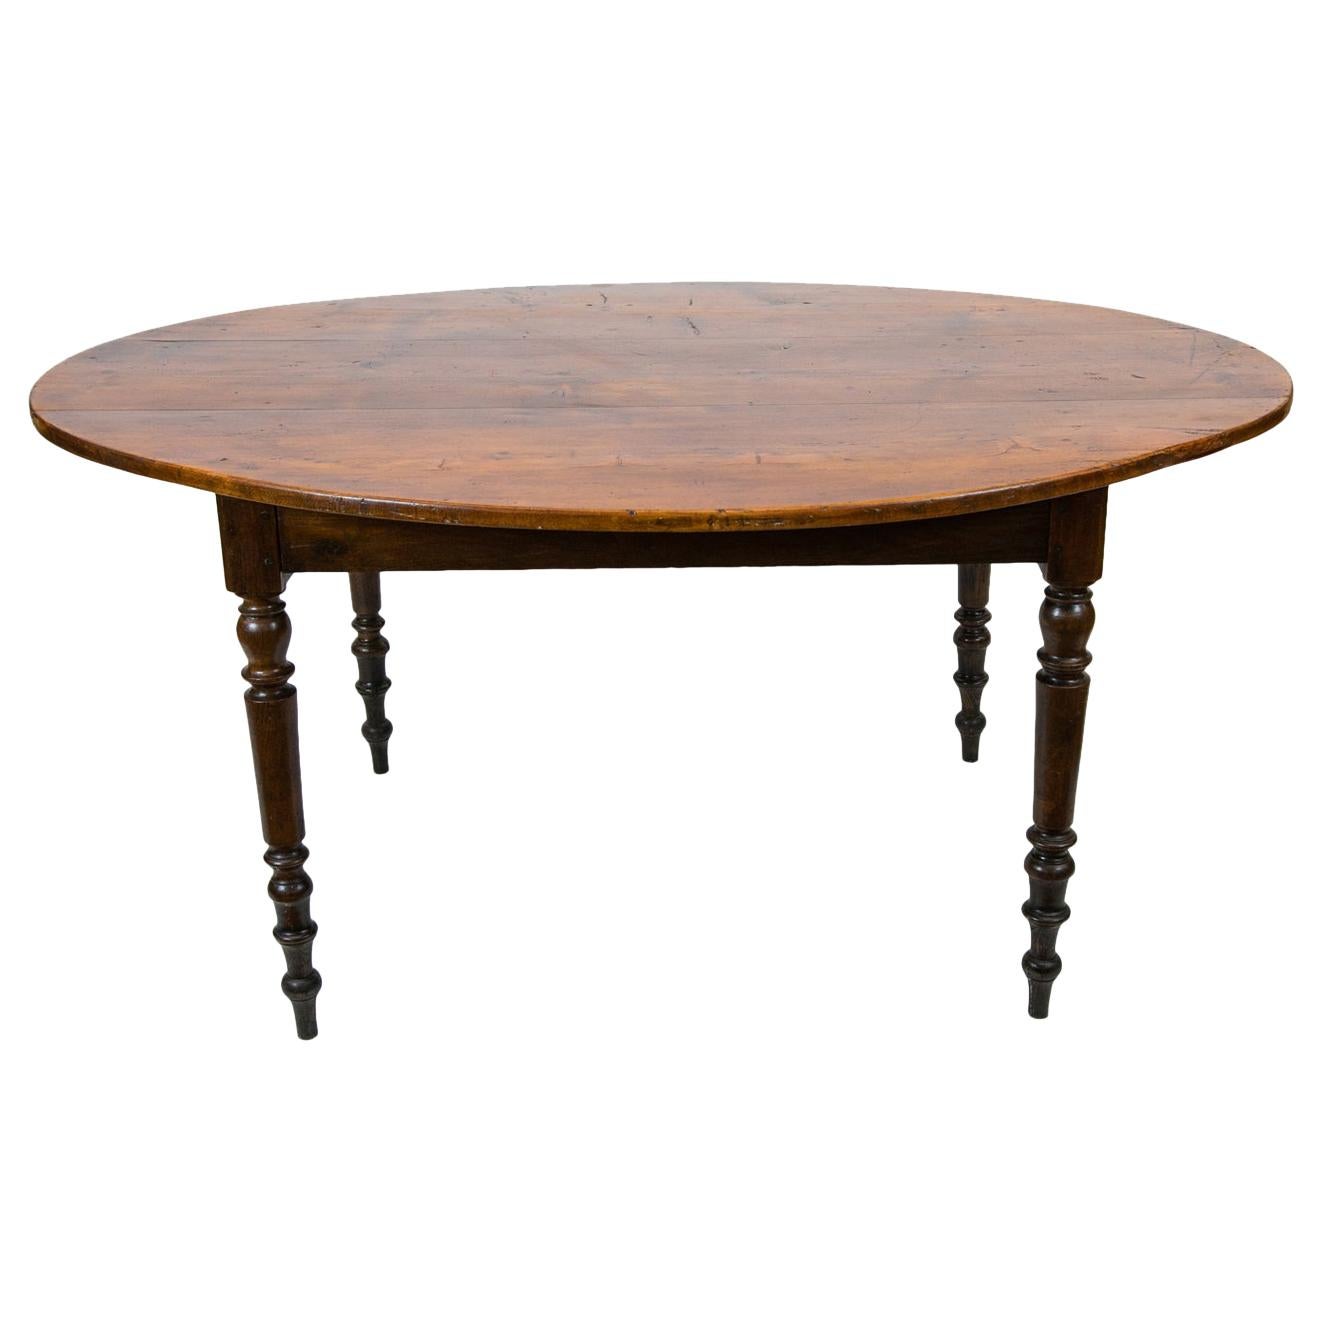 English Oval Pine Kitchen Table